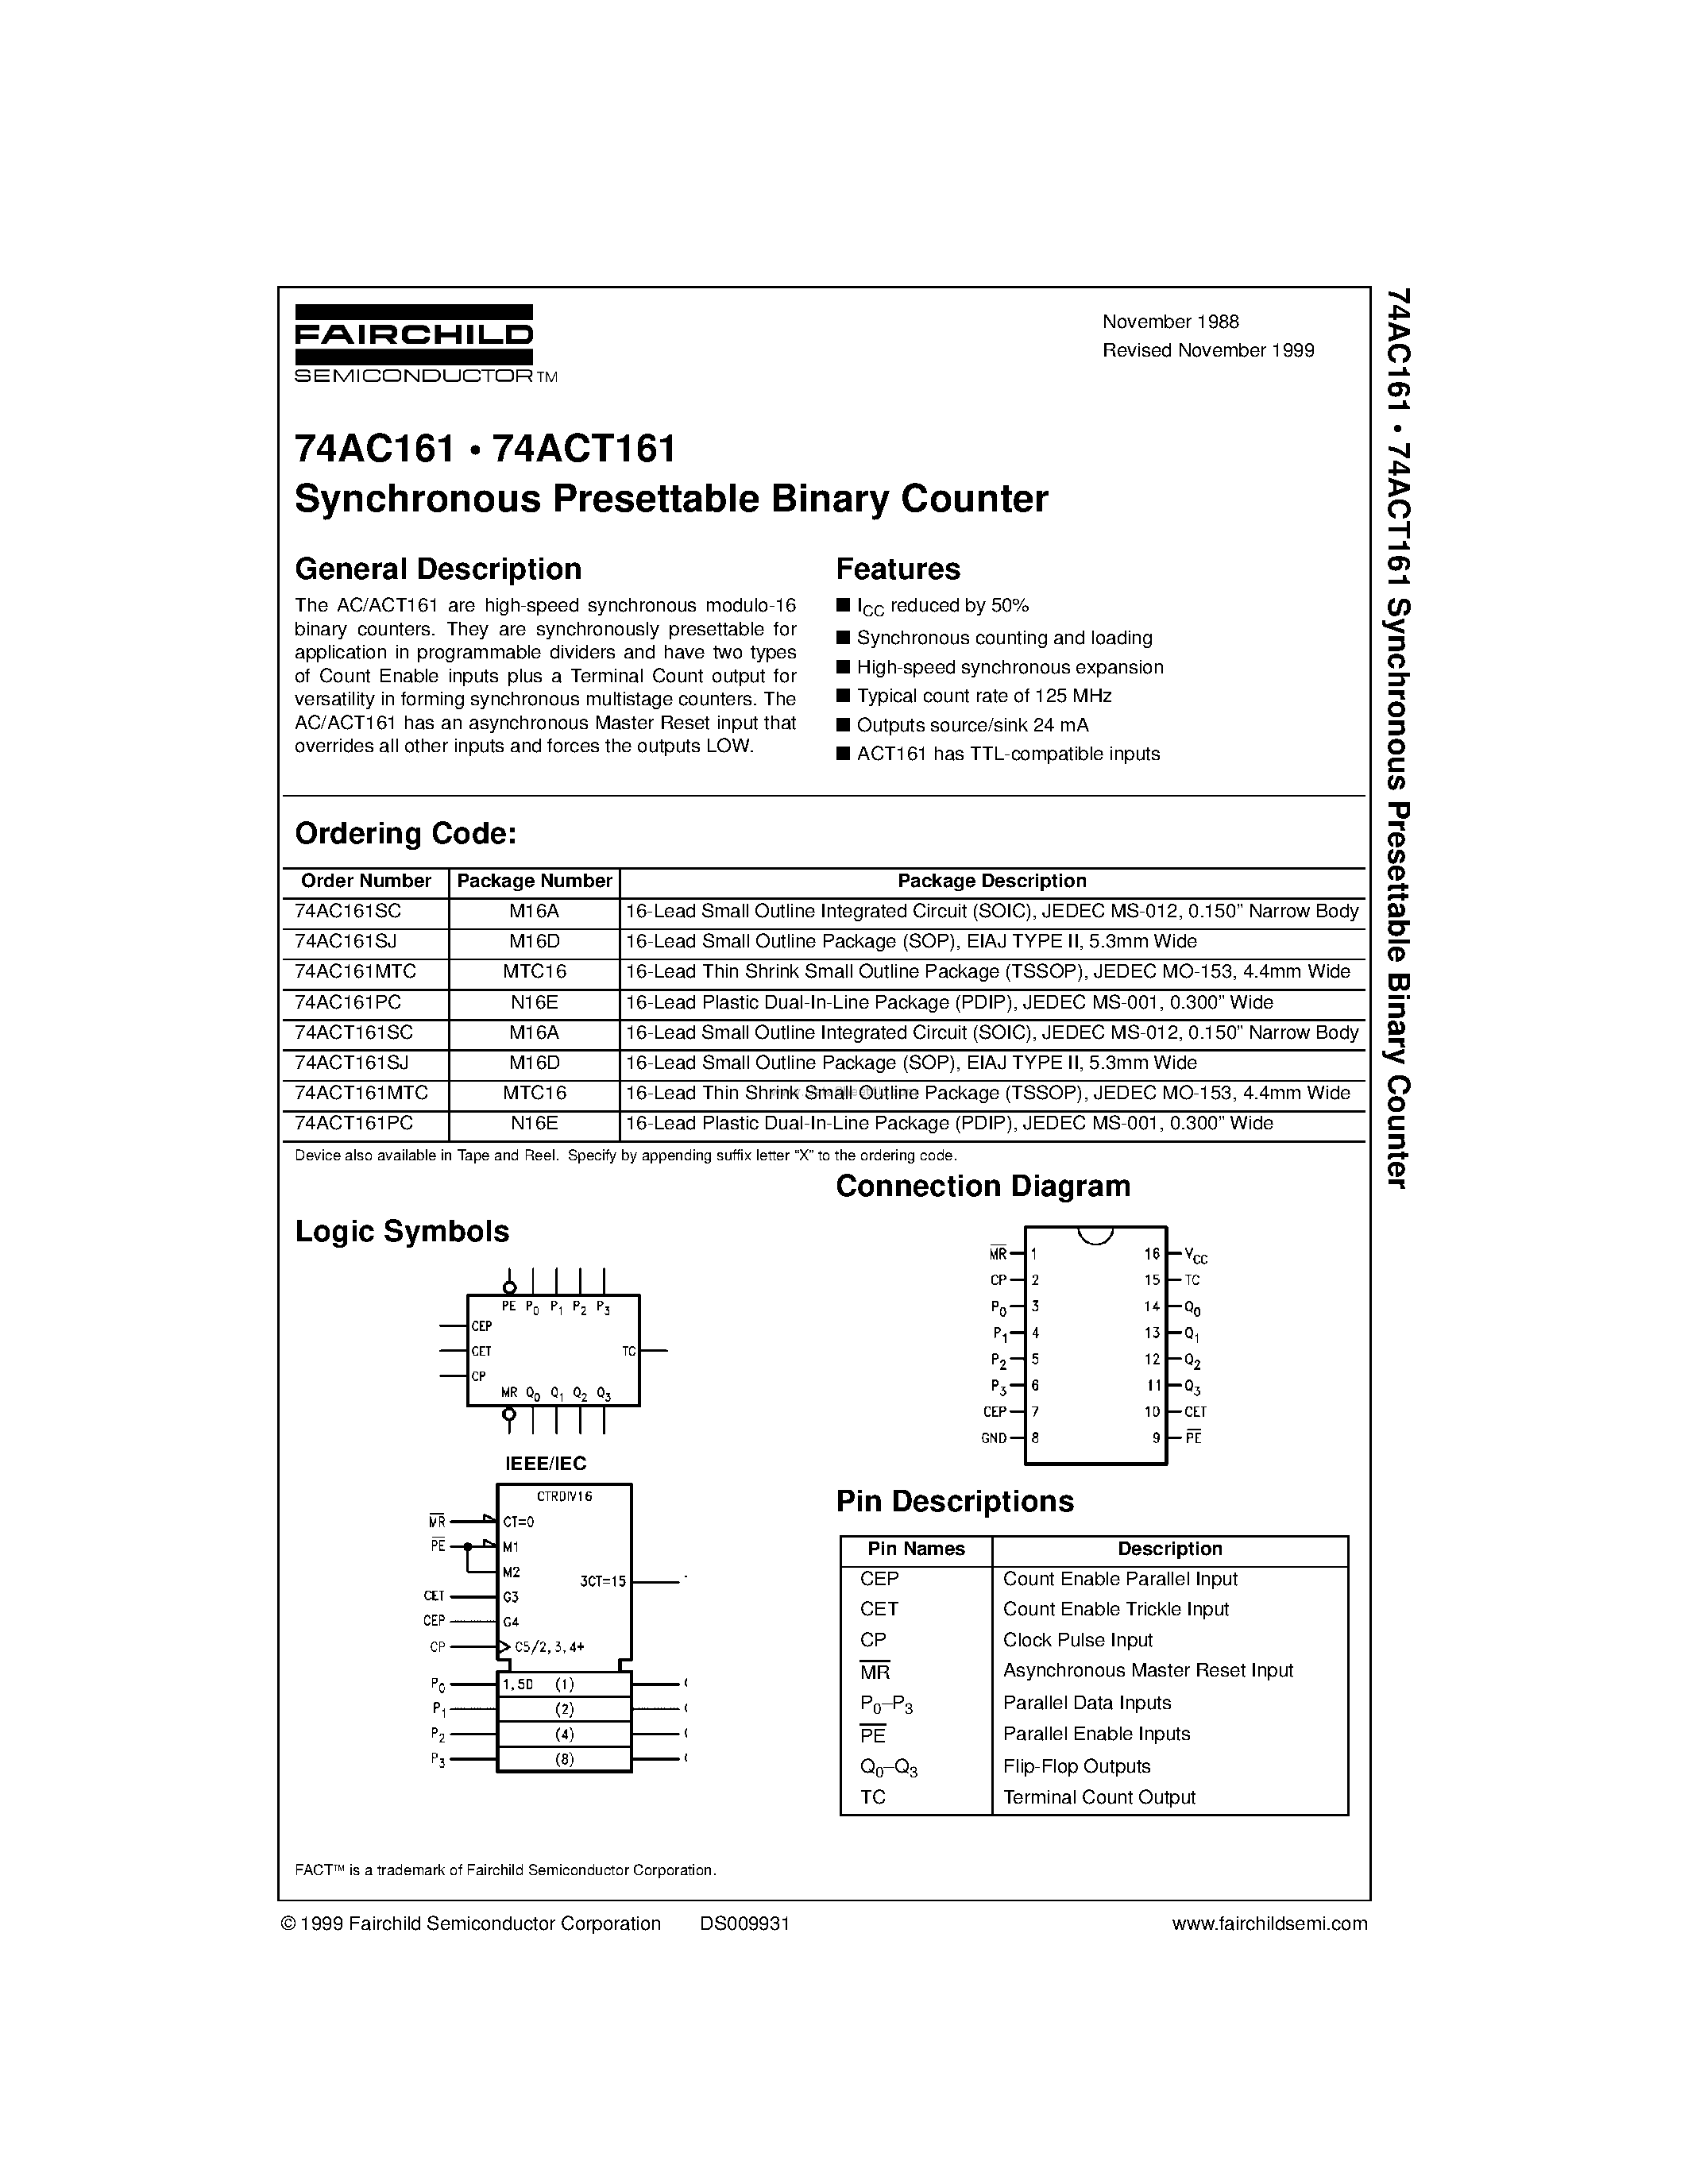 Datasheet 74AC161 - Synchronous Presettable Binary Counter page 1